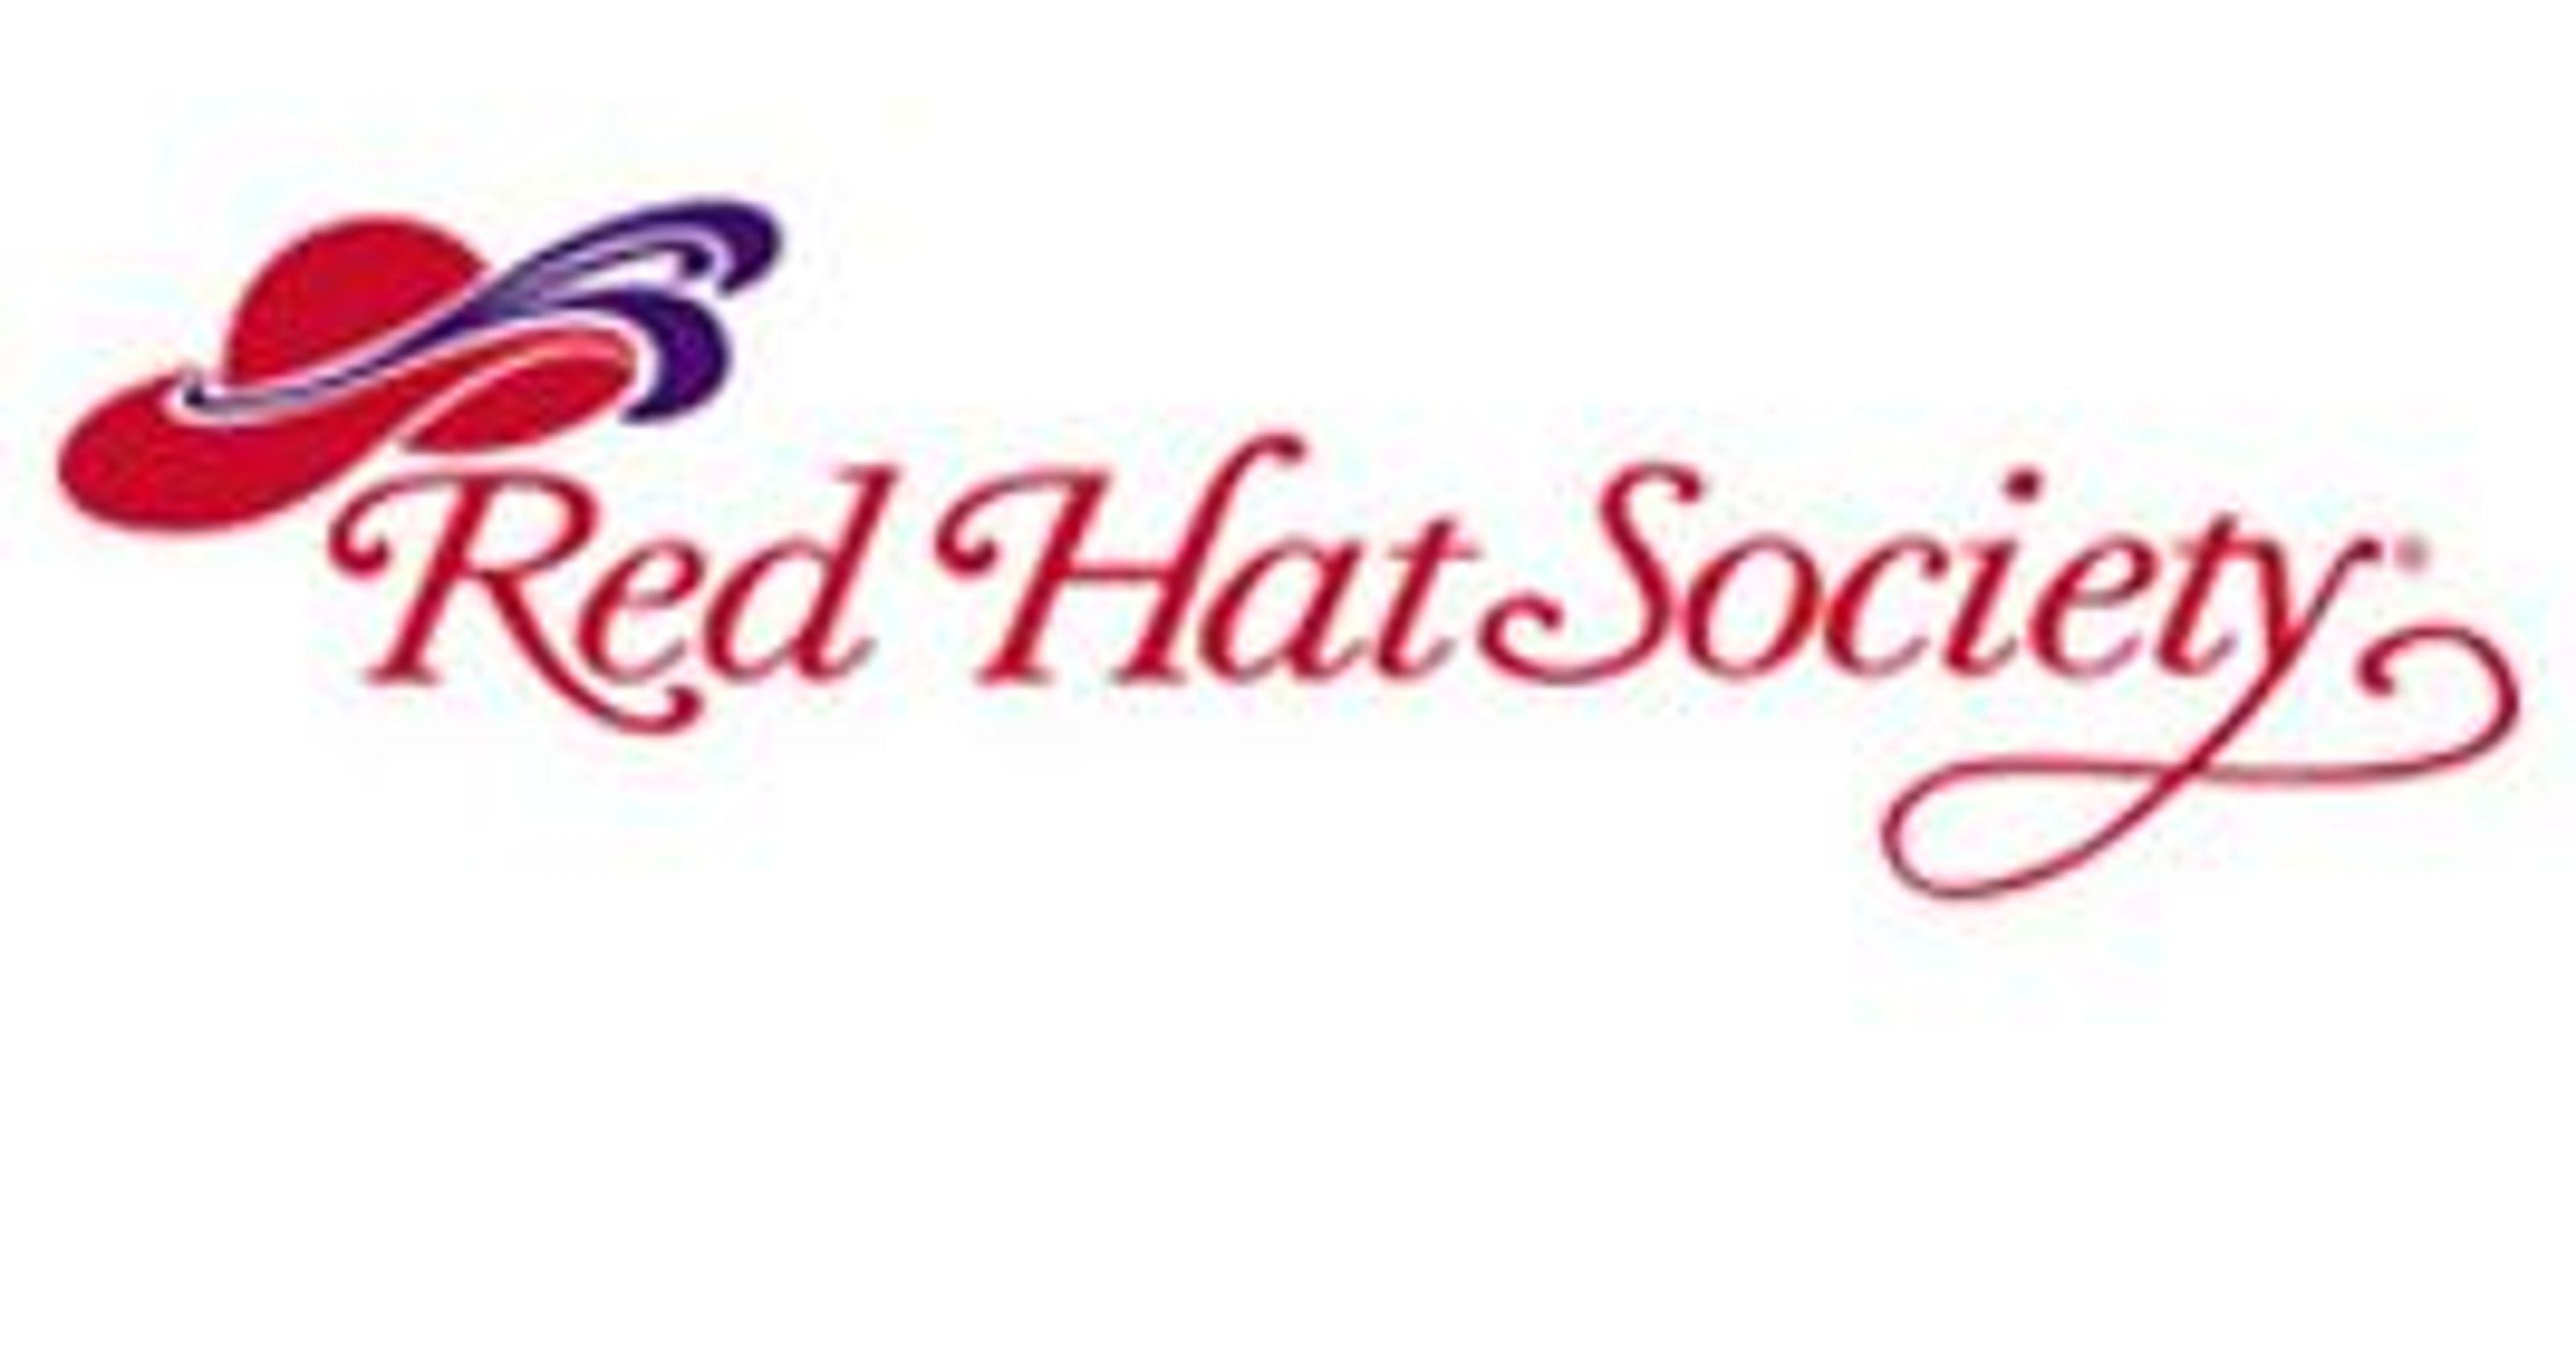 Red Hat Society Logo - Red Hat Society created to change perceptions of women